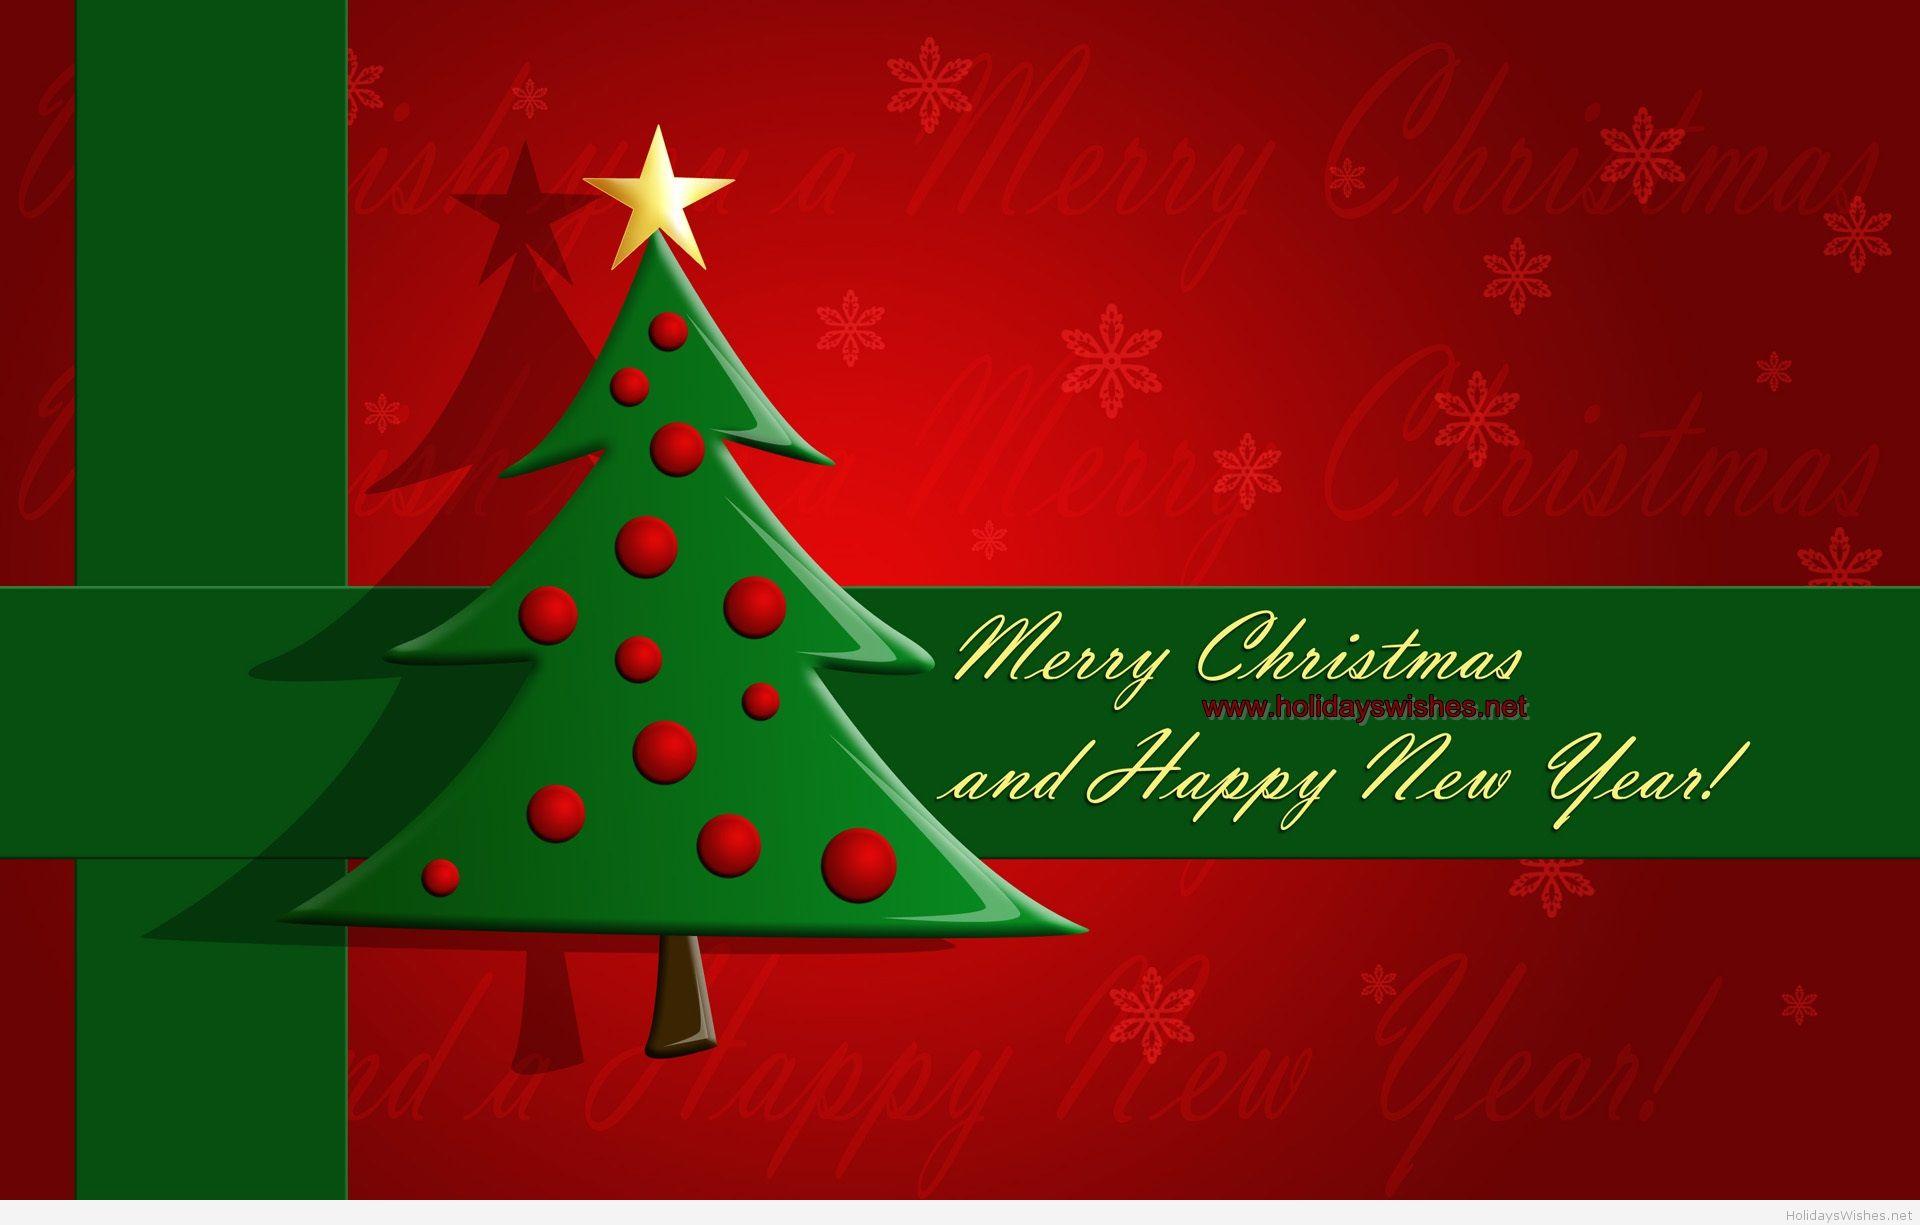 HD Merry Christmas 2014 happy new year wallpaper 2015 free